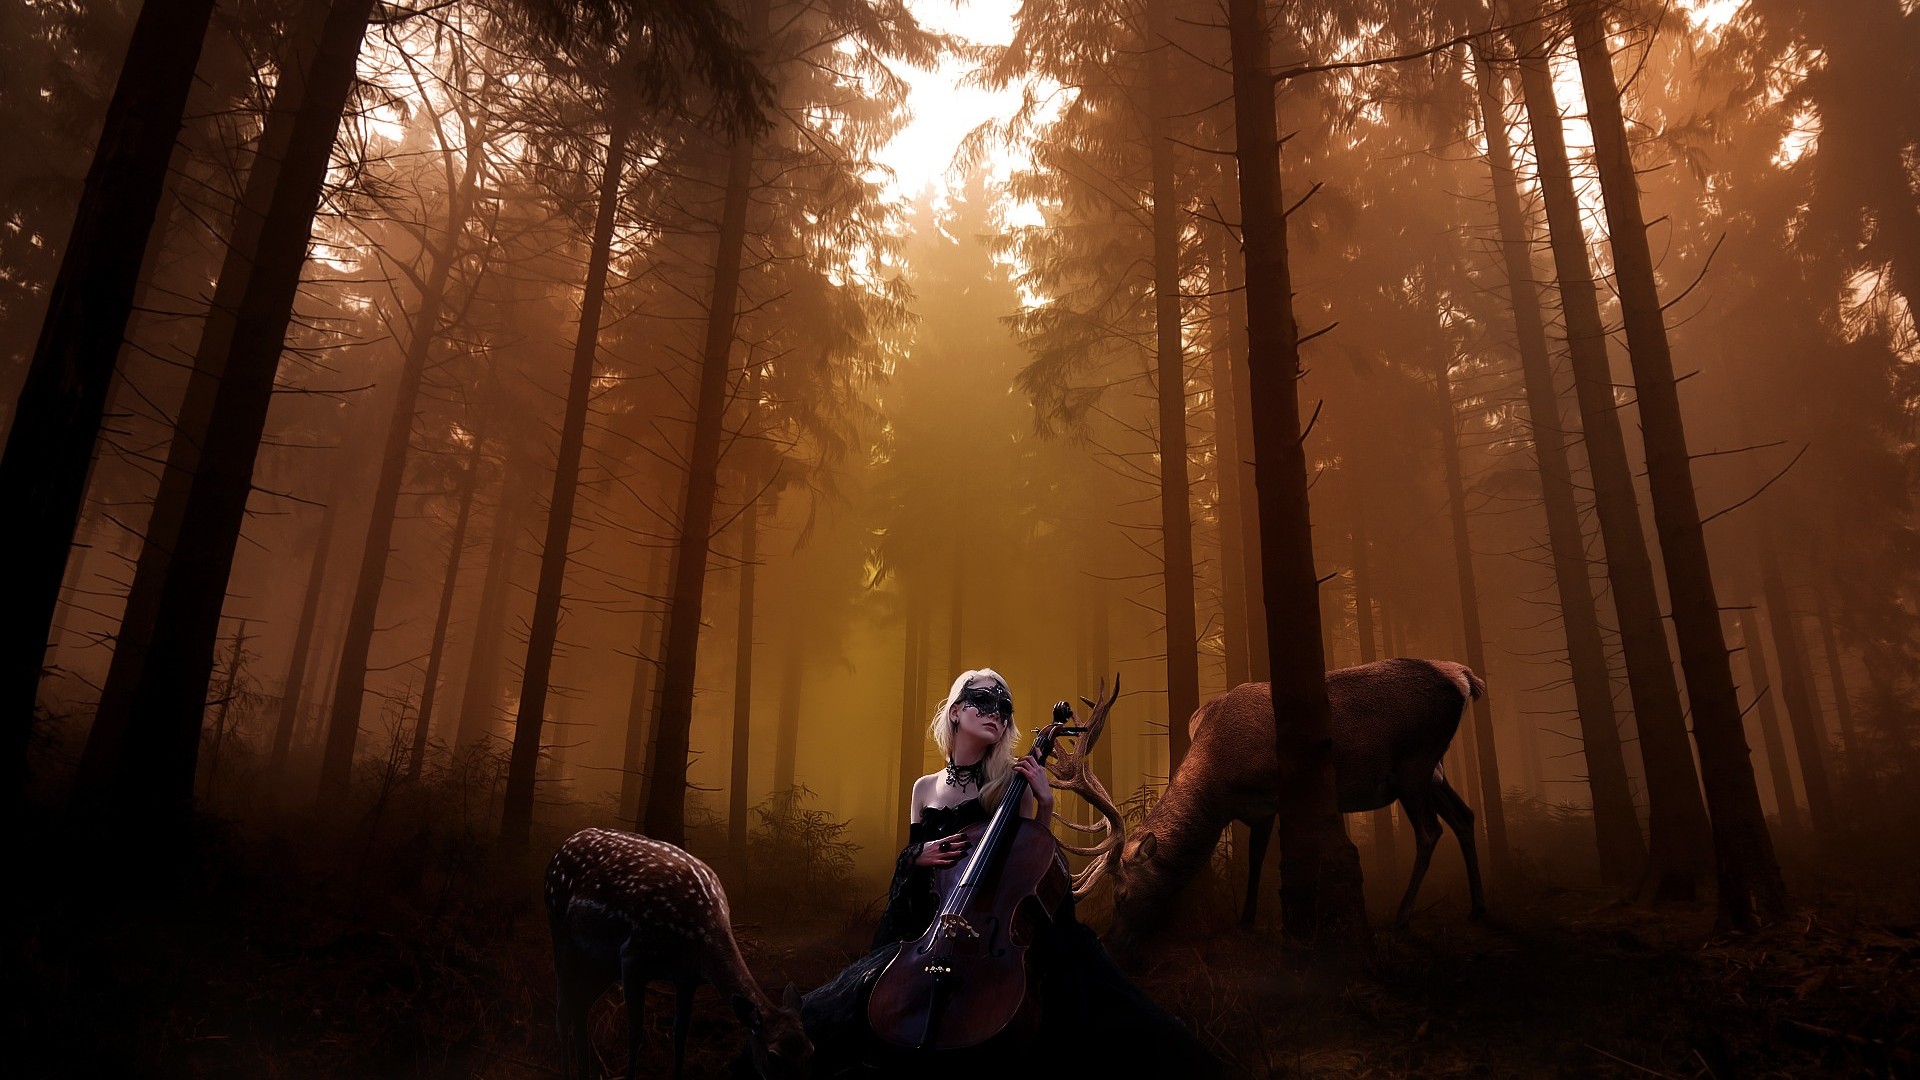 Cello Background Wallpaper High Definition Quality